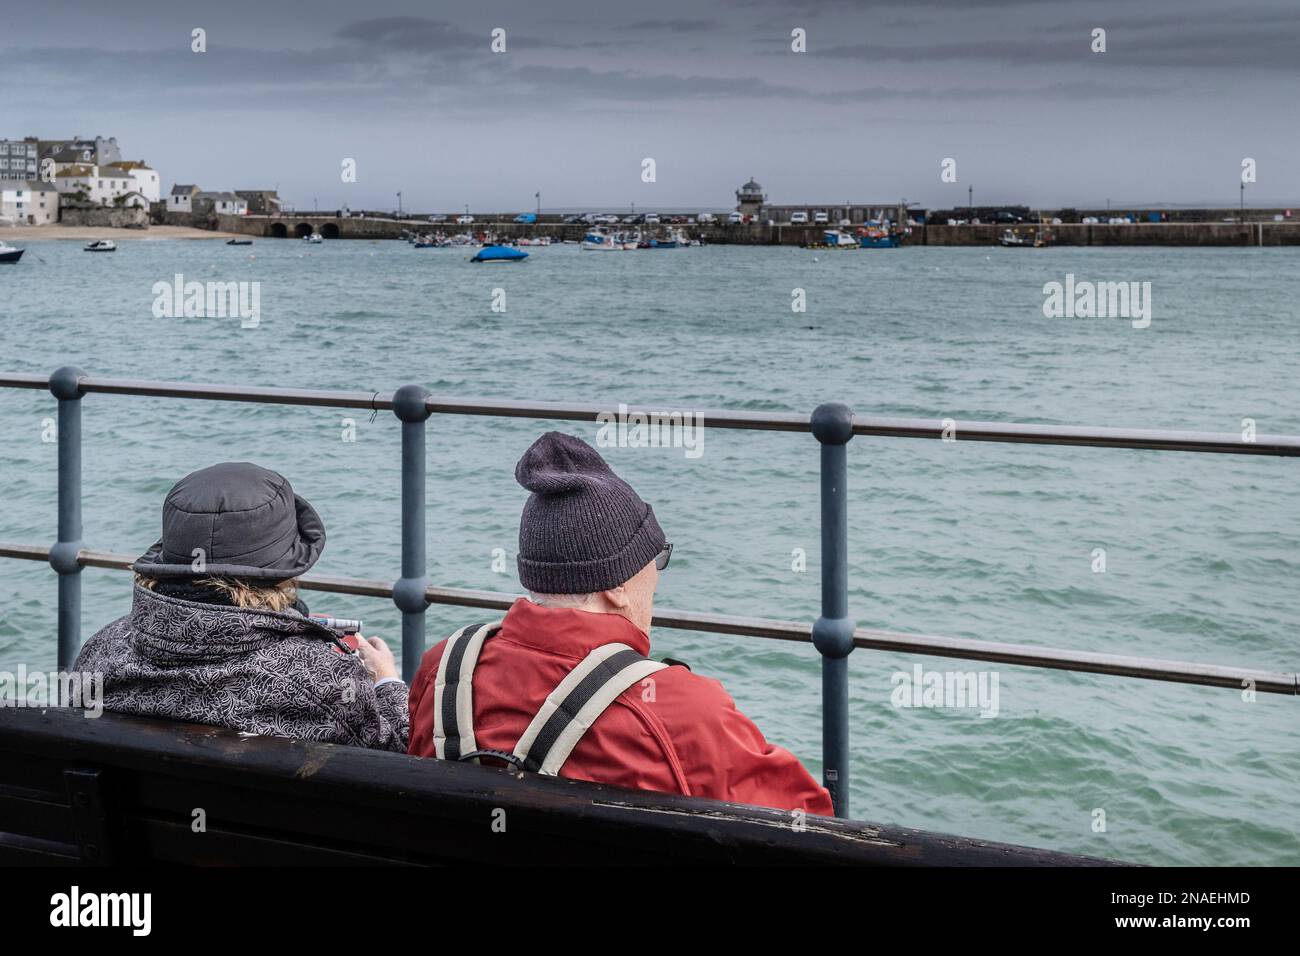 UK weather. Visitors sitting on a bench looking out to Smeatons Pier on a rainy chilly miserable day in the historic seaside town of St Ives in Cornwa Stock Photo